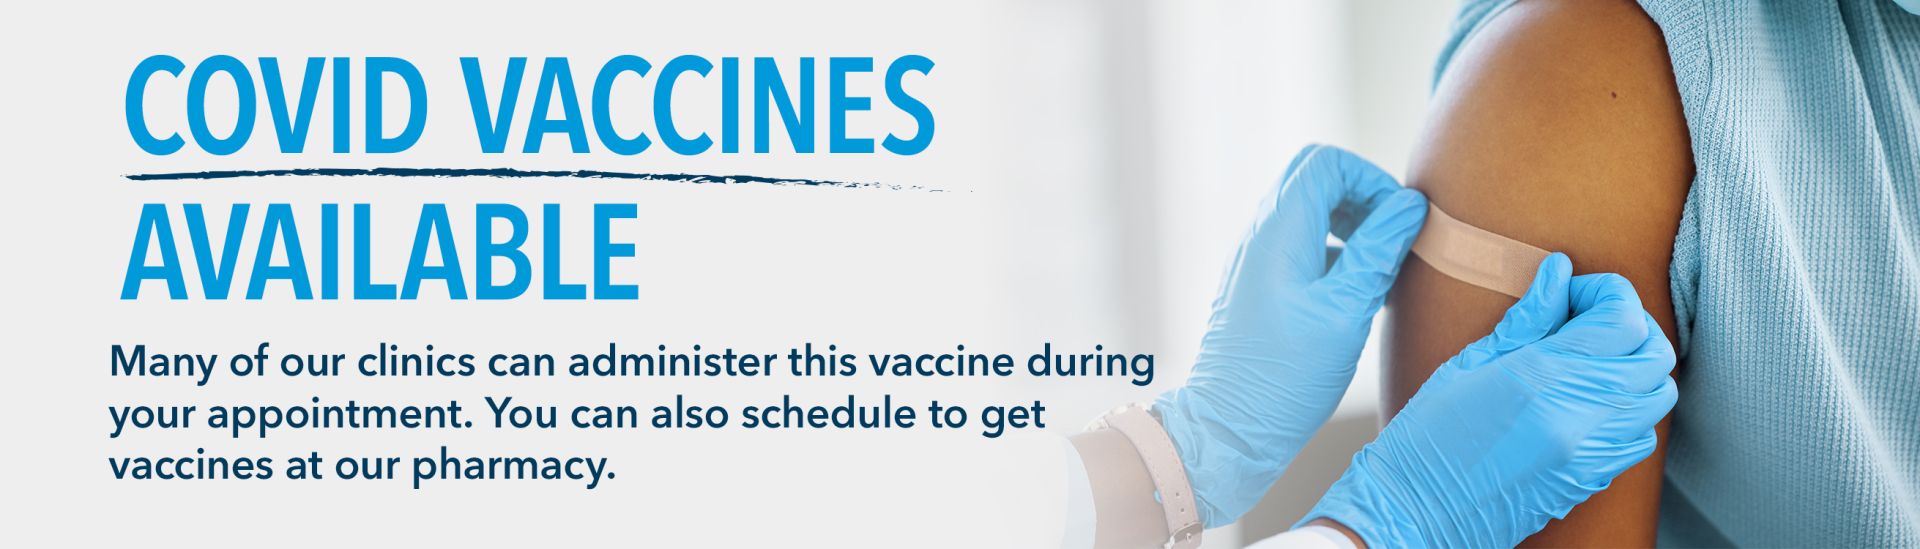 COVID Vaccines Available